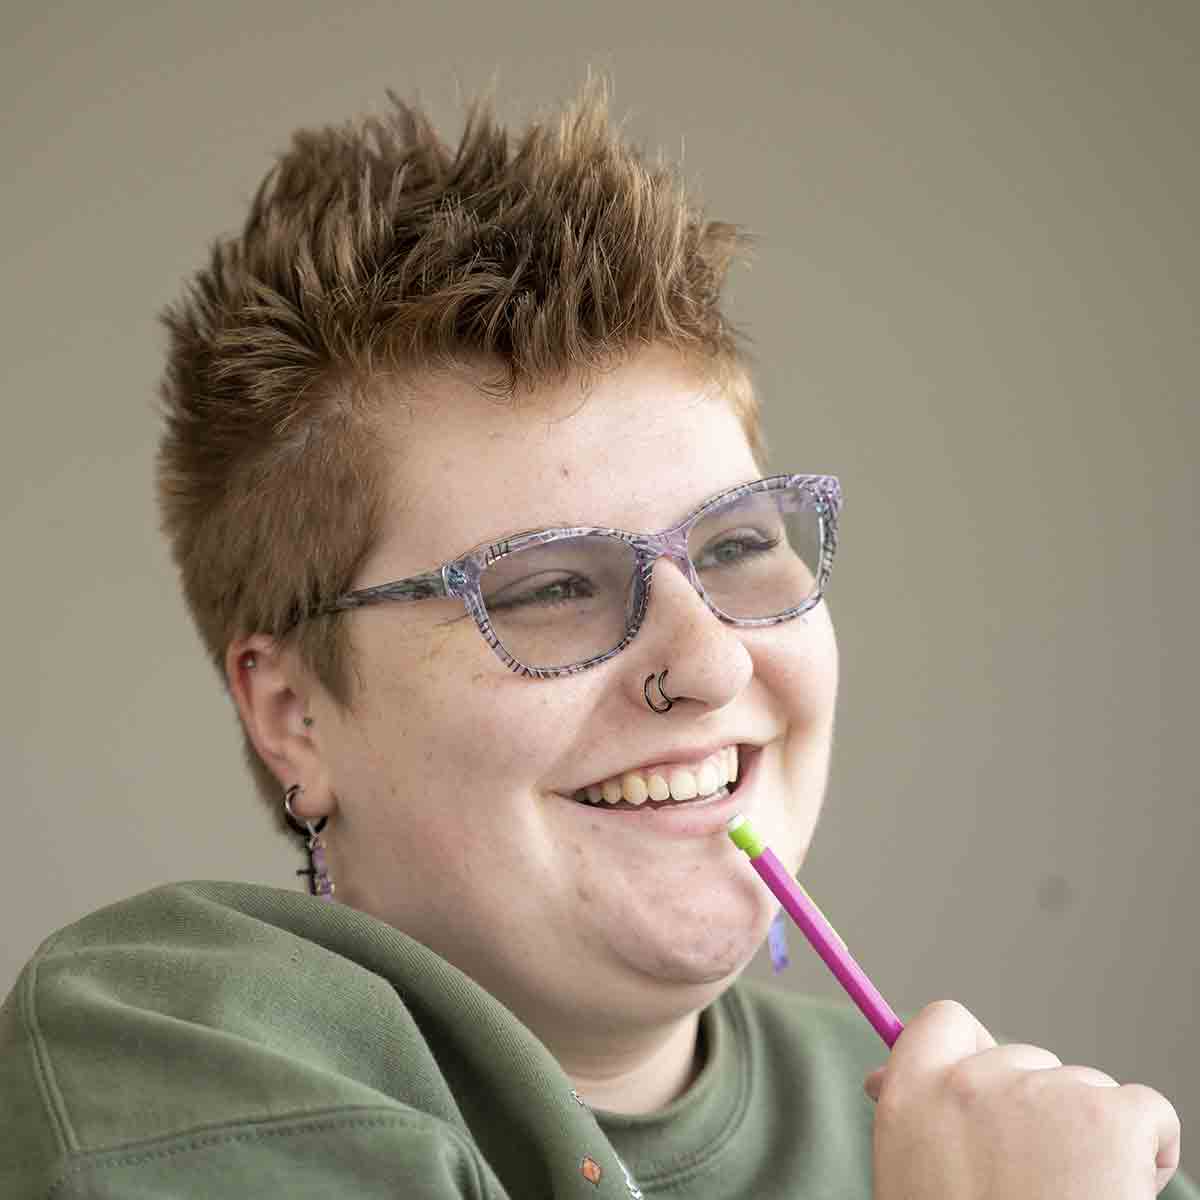 student holding pink pencil